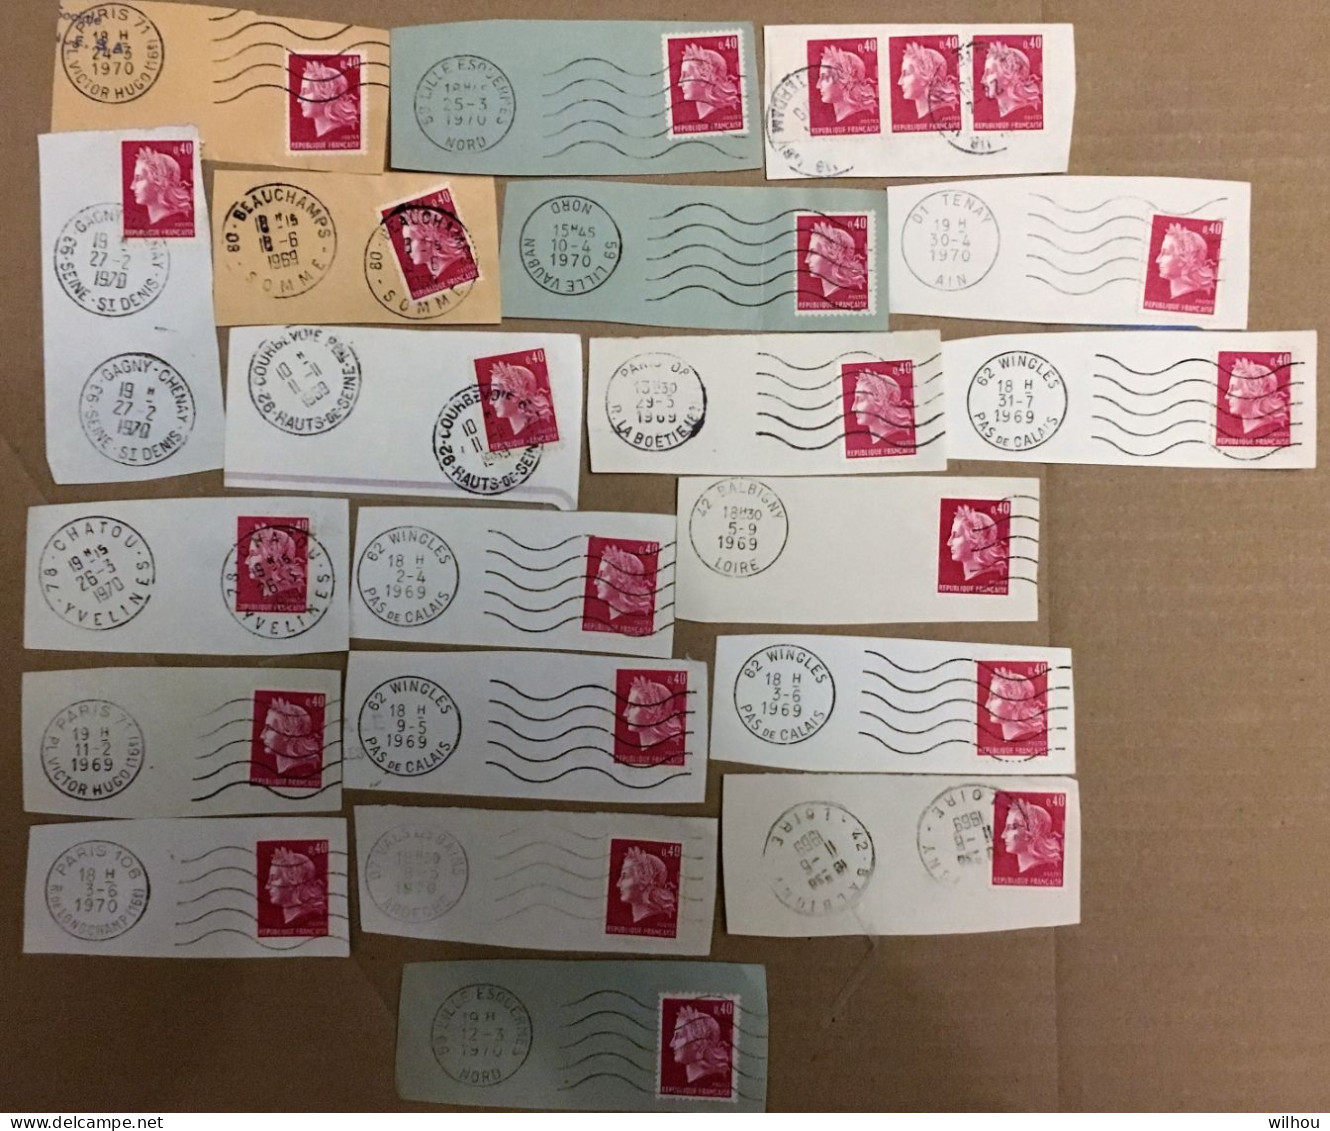 LOT DE 22 TIMBRES MARIANNE CHEFFER OBLITERATIONS PUBLICITAIRES A 0.40 ROUGES N° 1536 B - 1967-1970 Marianne Of Cheffer